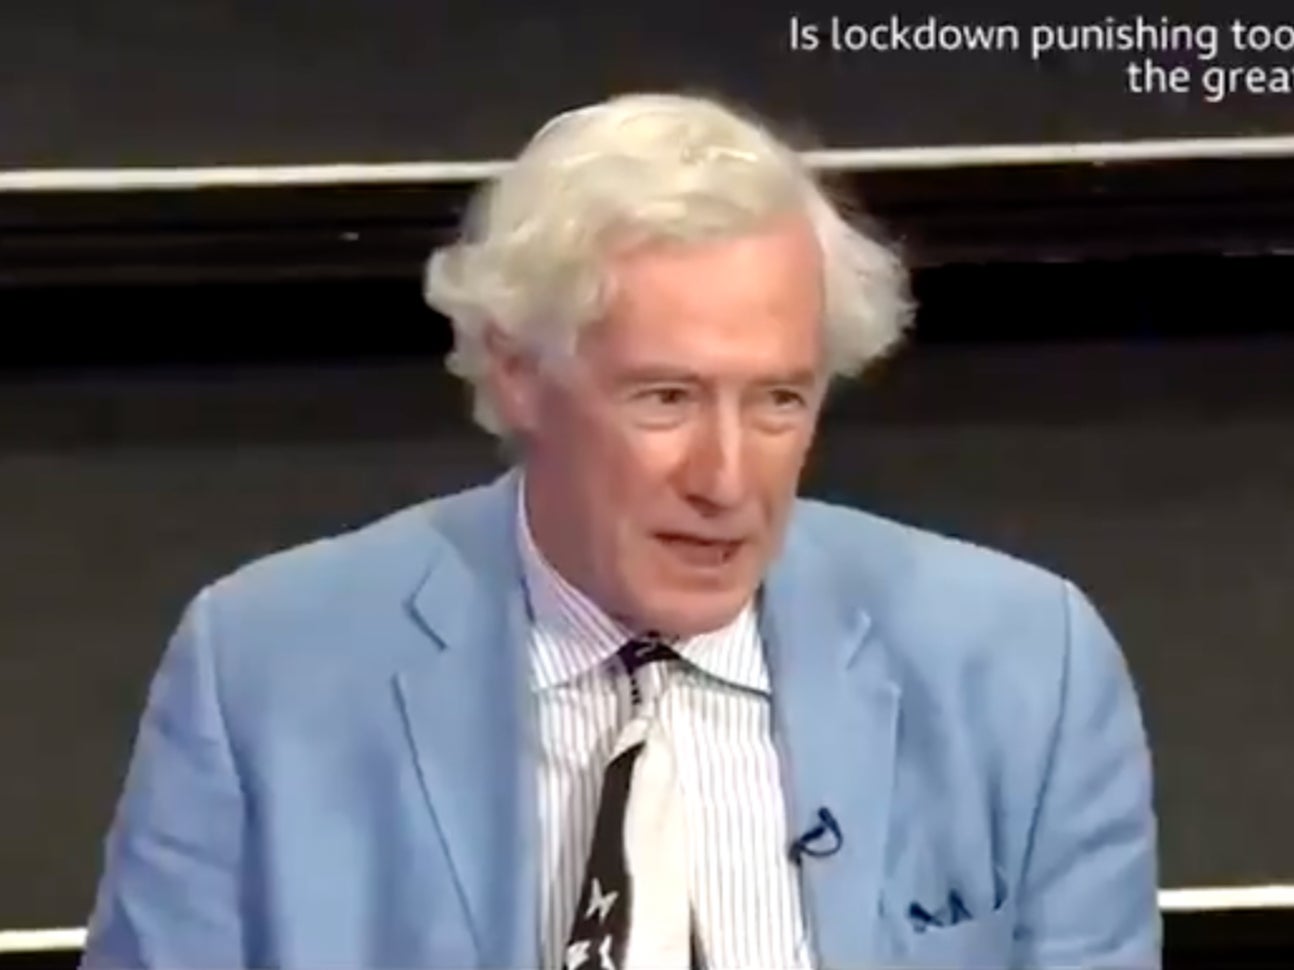 Jonathan Sumption made a series of controversial remarks about the value of a life on BBC One’s ‘The Big Questions’